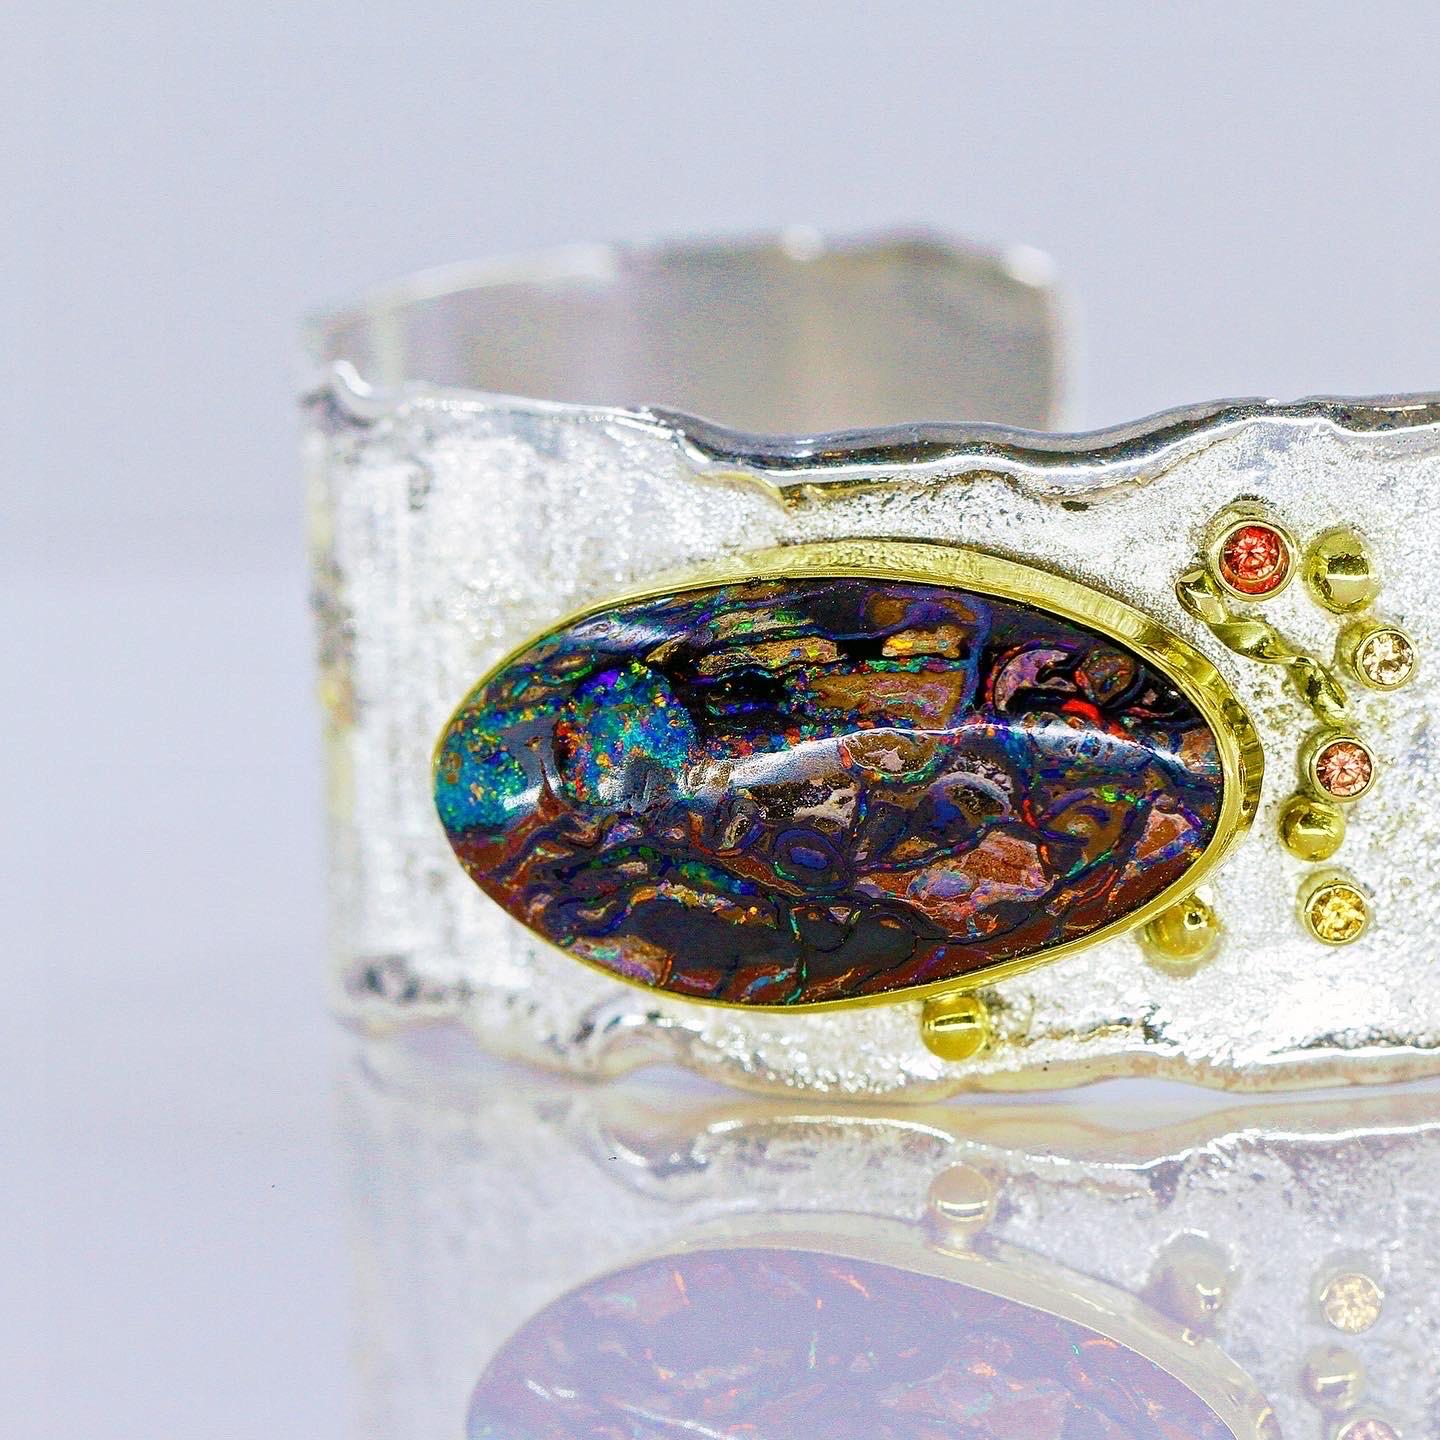 A Matrix opal shot through with every color that opal has to offer.  The opal is wrapped in 22k gold, accent sapphires compliment, and gold dust sprinkled on the sterling silver cuff bracelet.  The boulder opal cuff bracelet is approximately 1